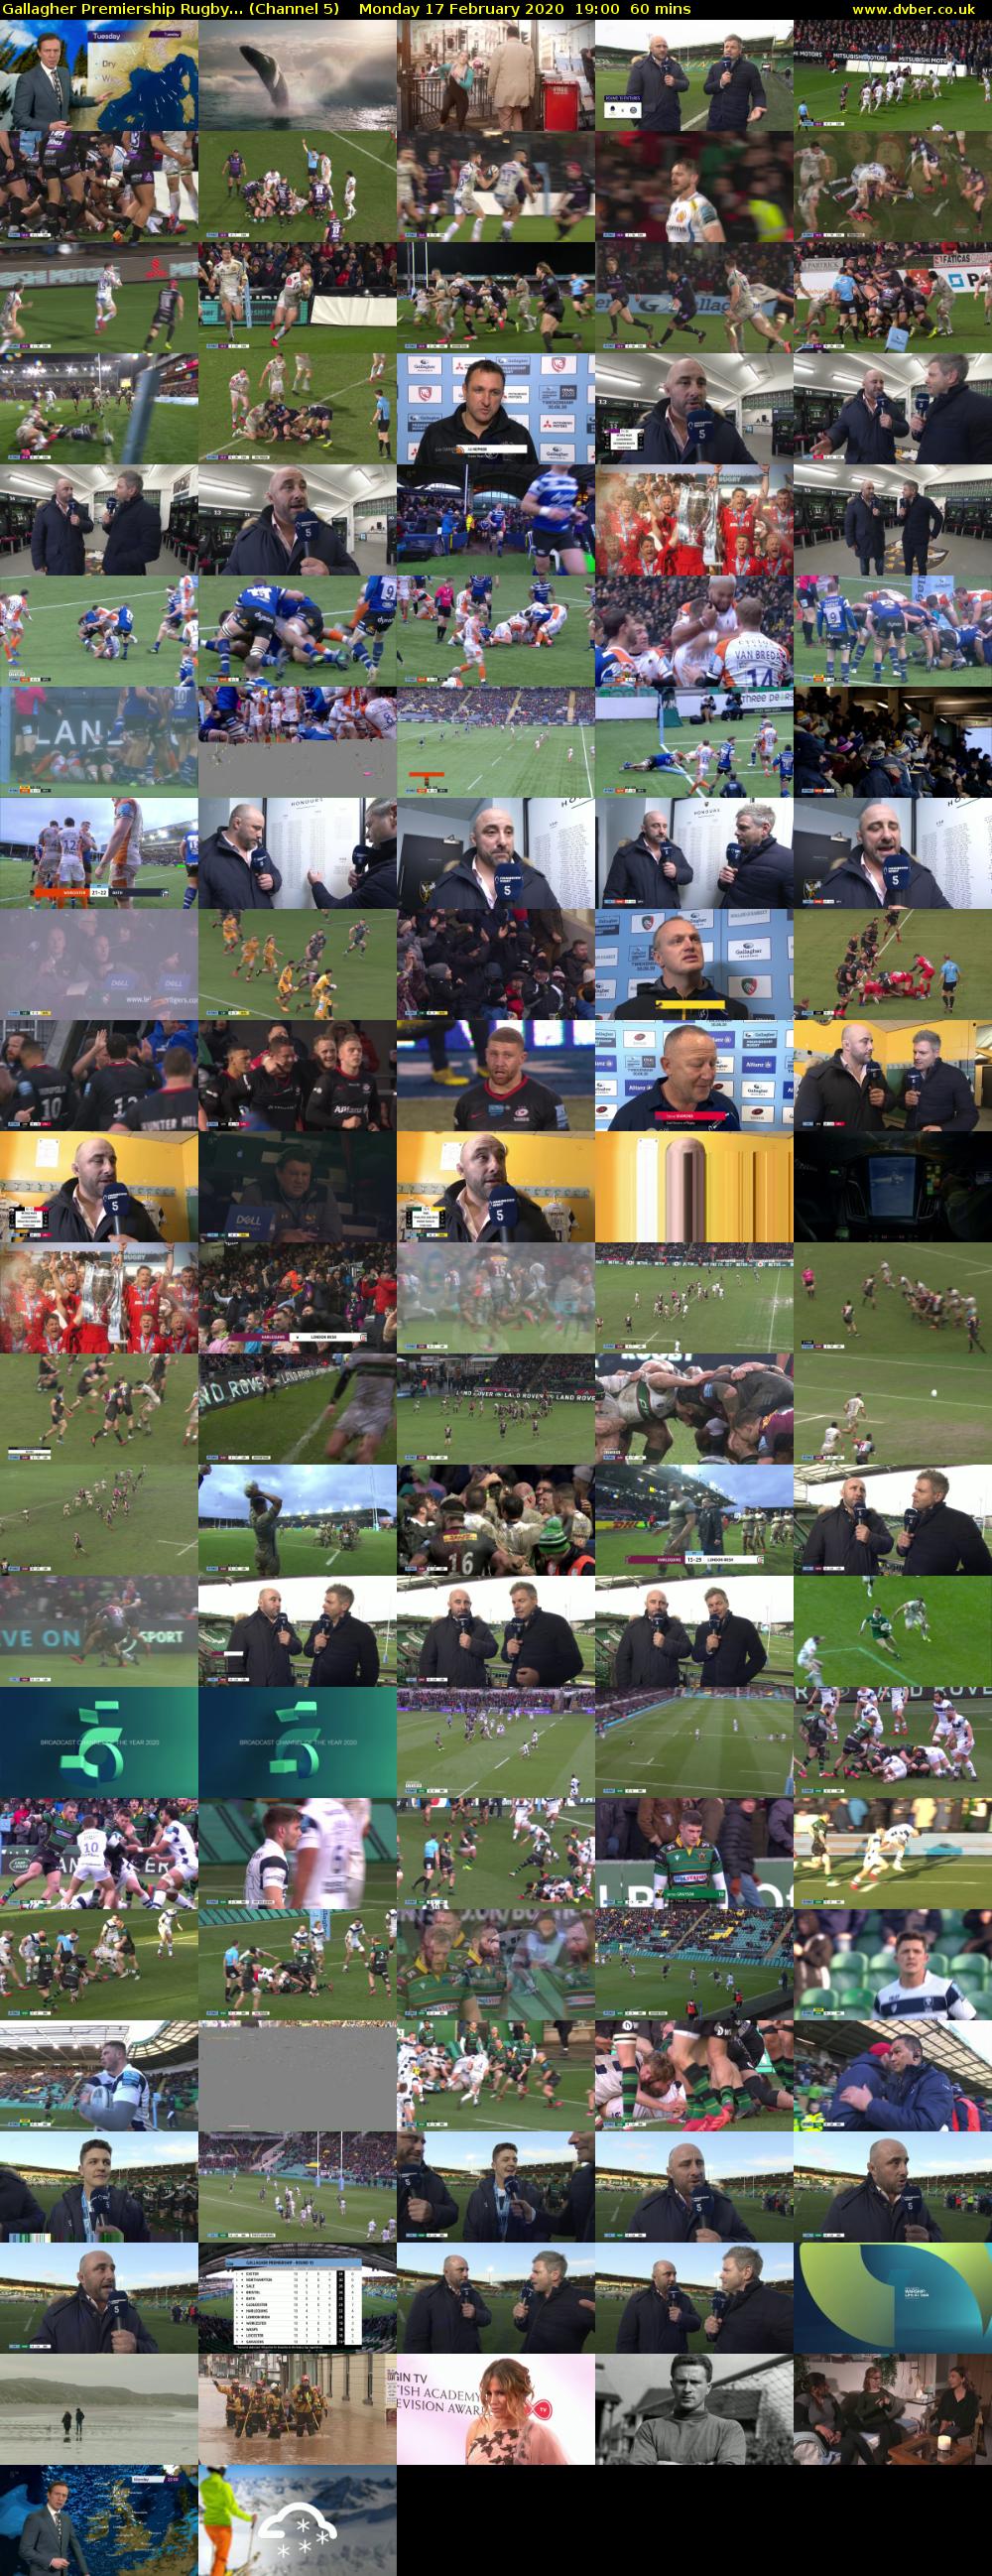 Gallagher Premiership Rugby... (Channel 5) Monday 17 February 2020 19:00 - 20:00